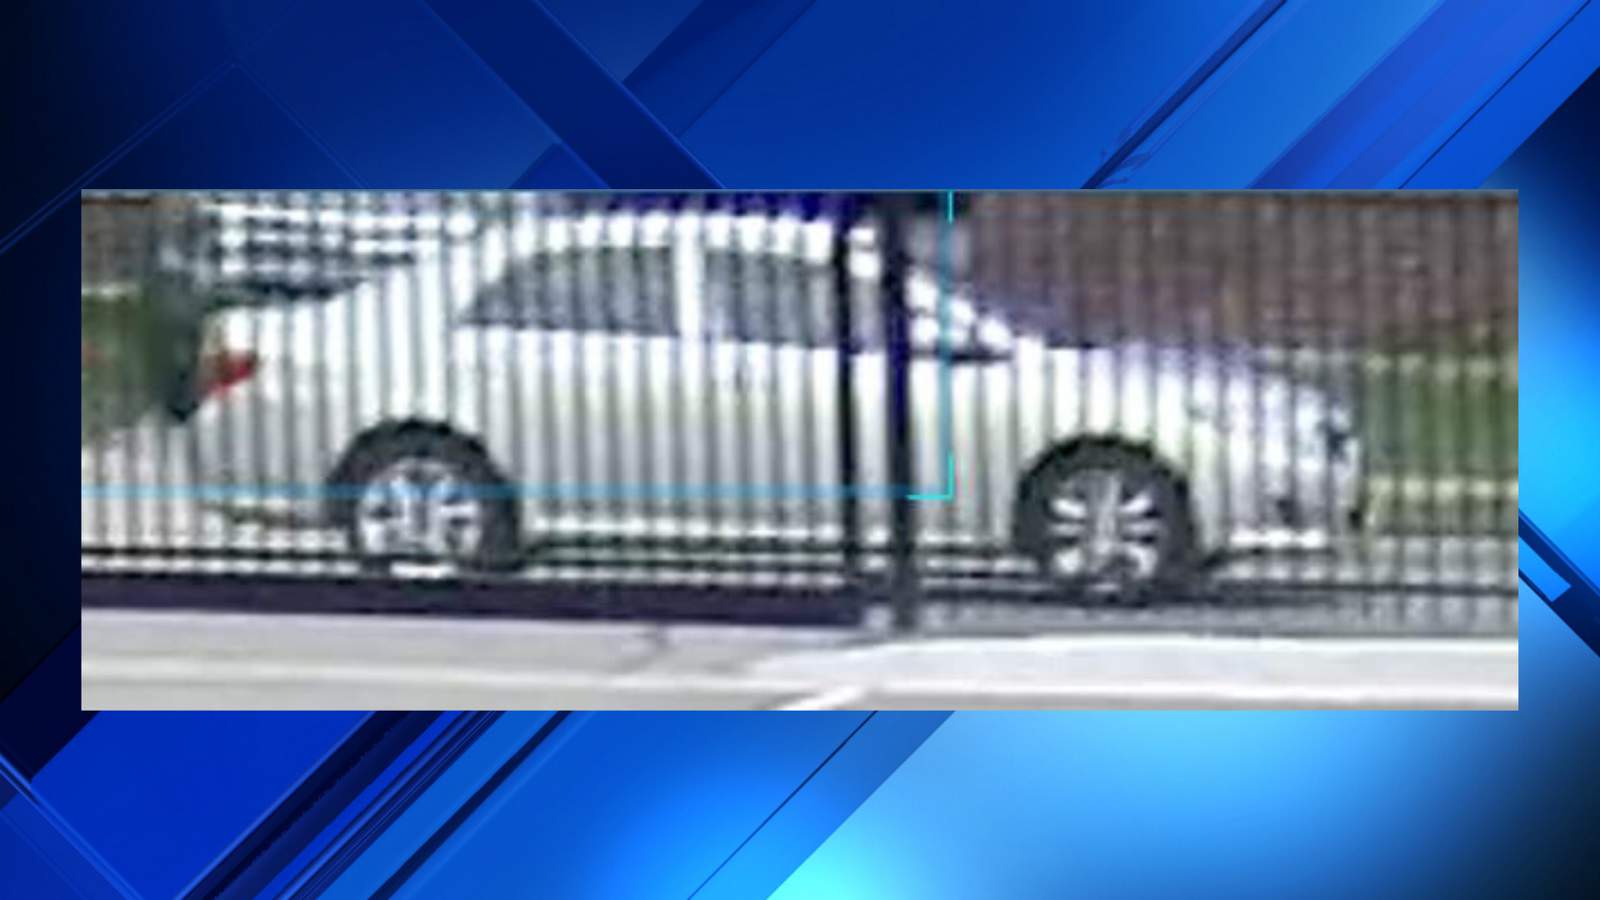 Dearborn police looking for driver in connection to hit-and-run of bicyclist